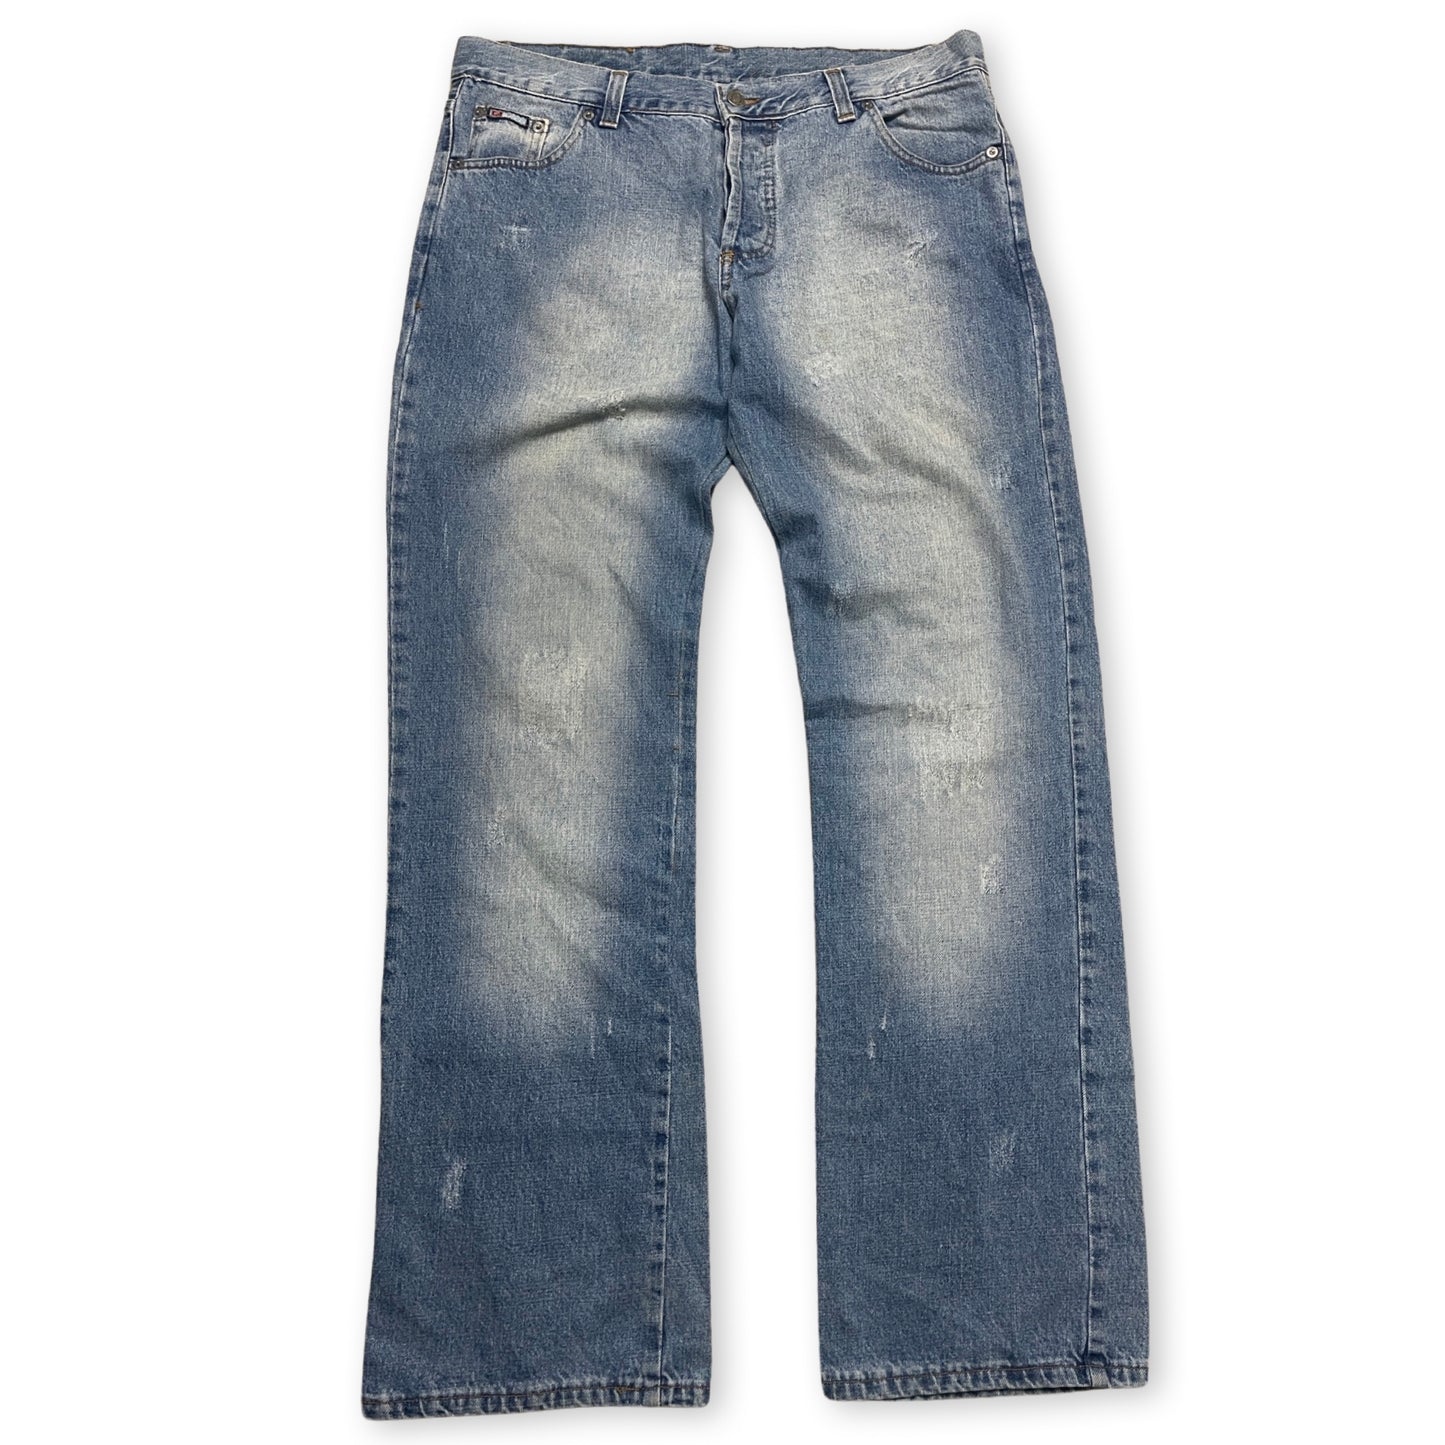 Morris Embroidered JACK Jeans (W36/L44)